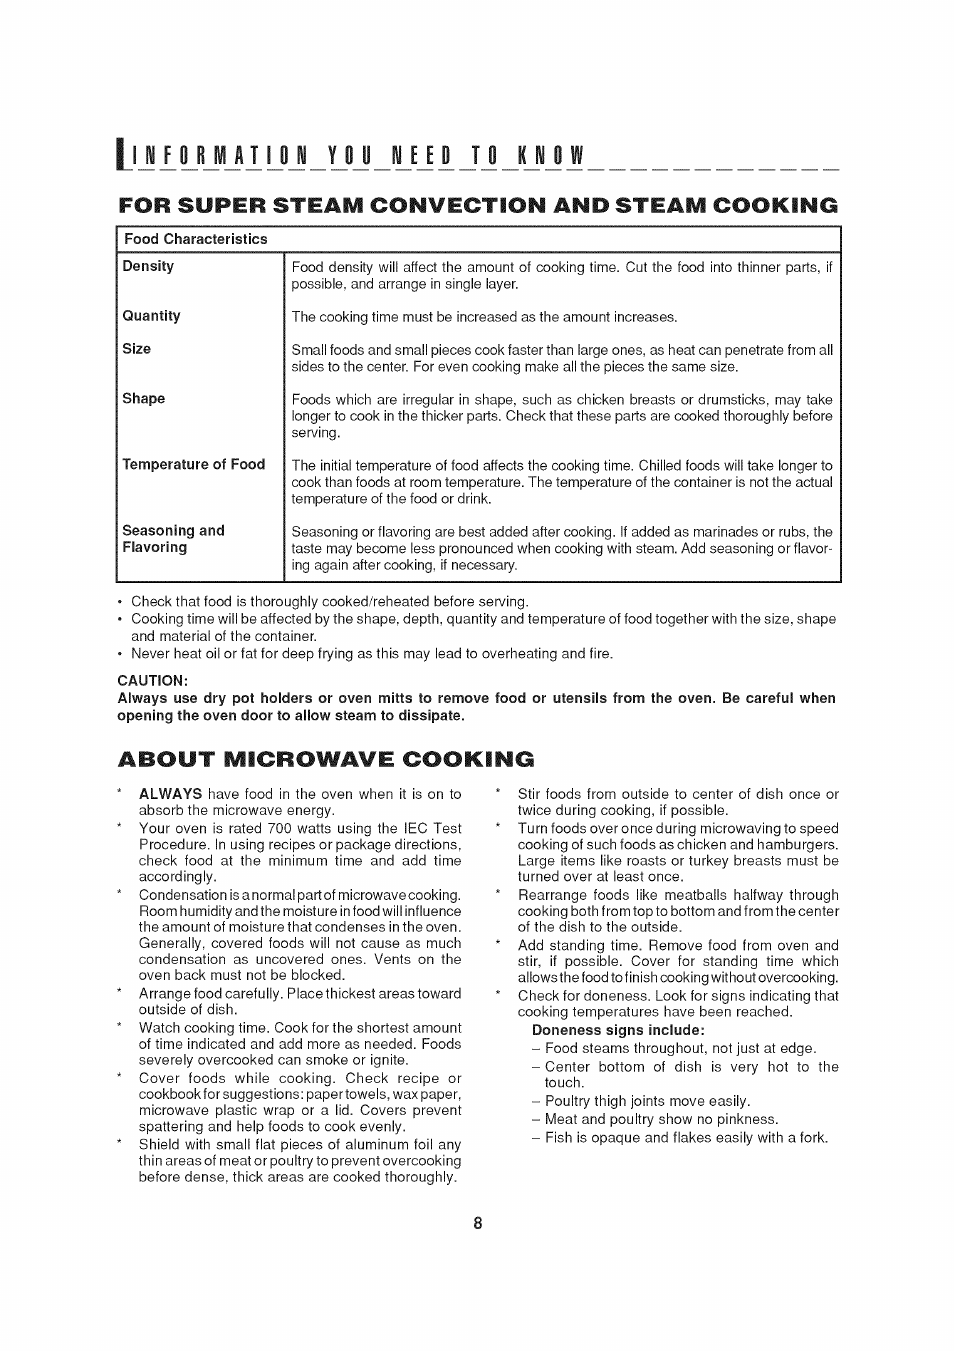 For super steam convection and steam cooking, Caution, About microwave cooking | Li 1 lyjl l“j _l"j _™jj iji jji j | Sharp AX-1200 User Manual | Page 10 / 43